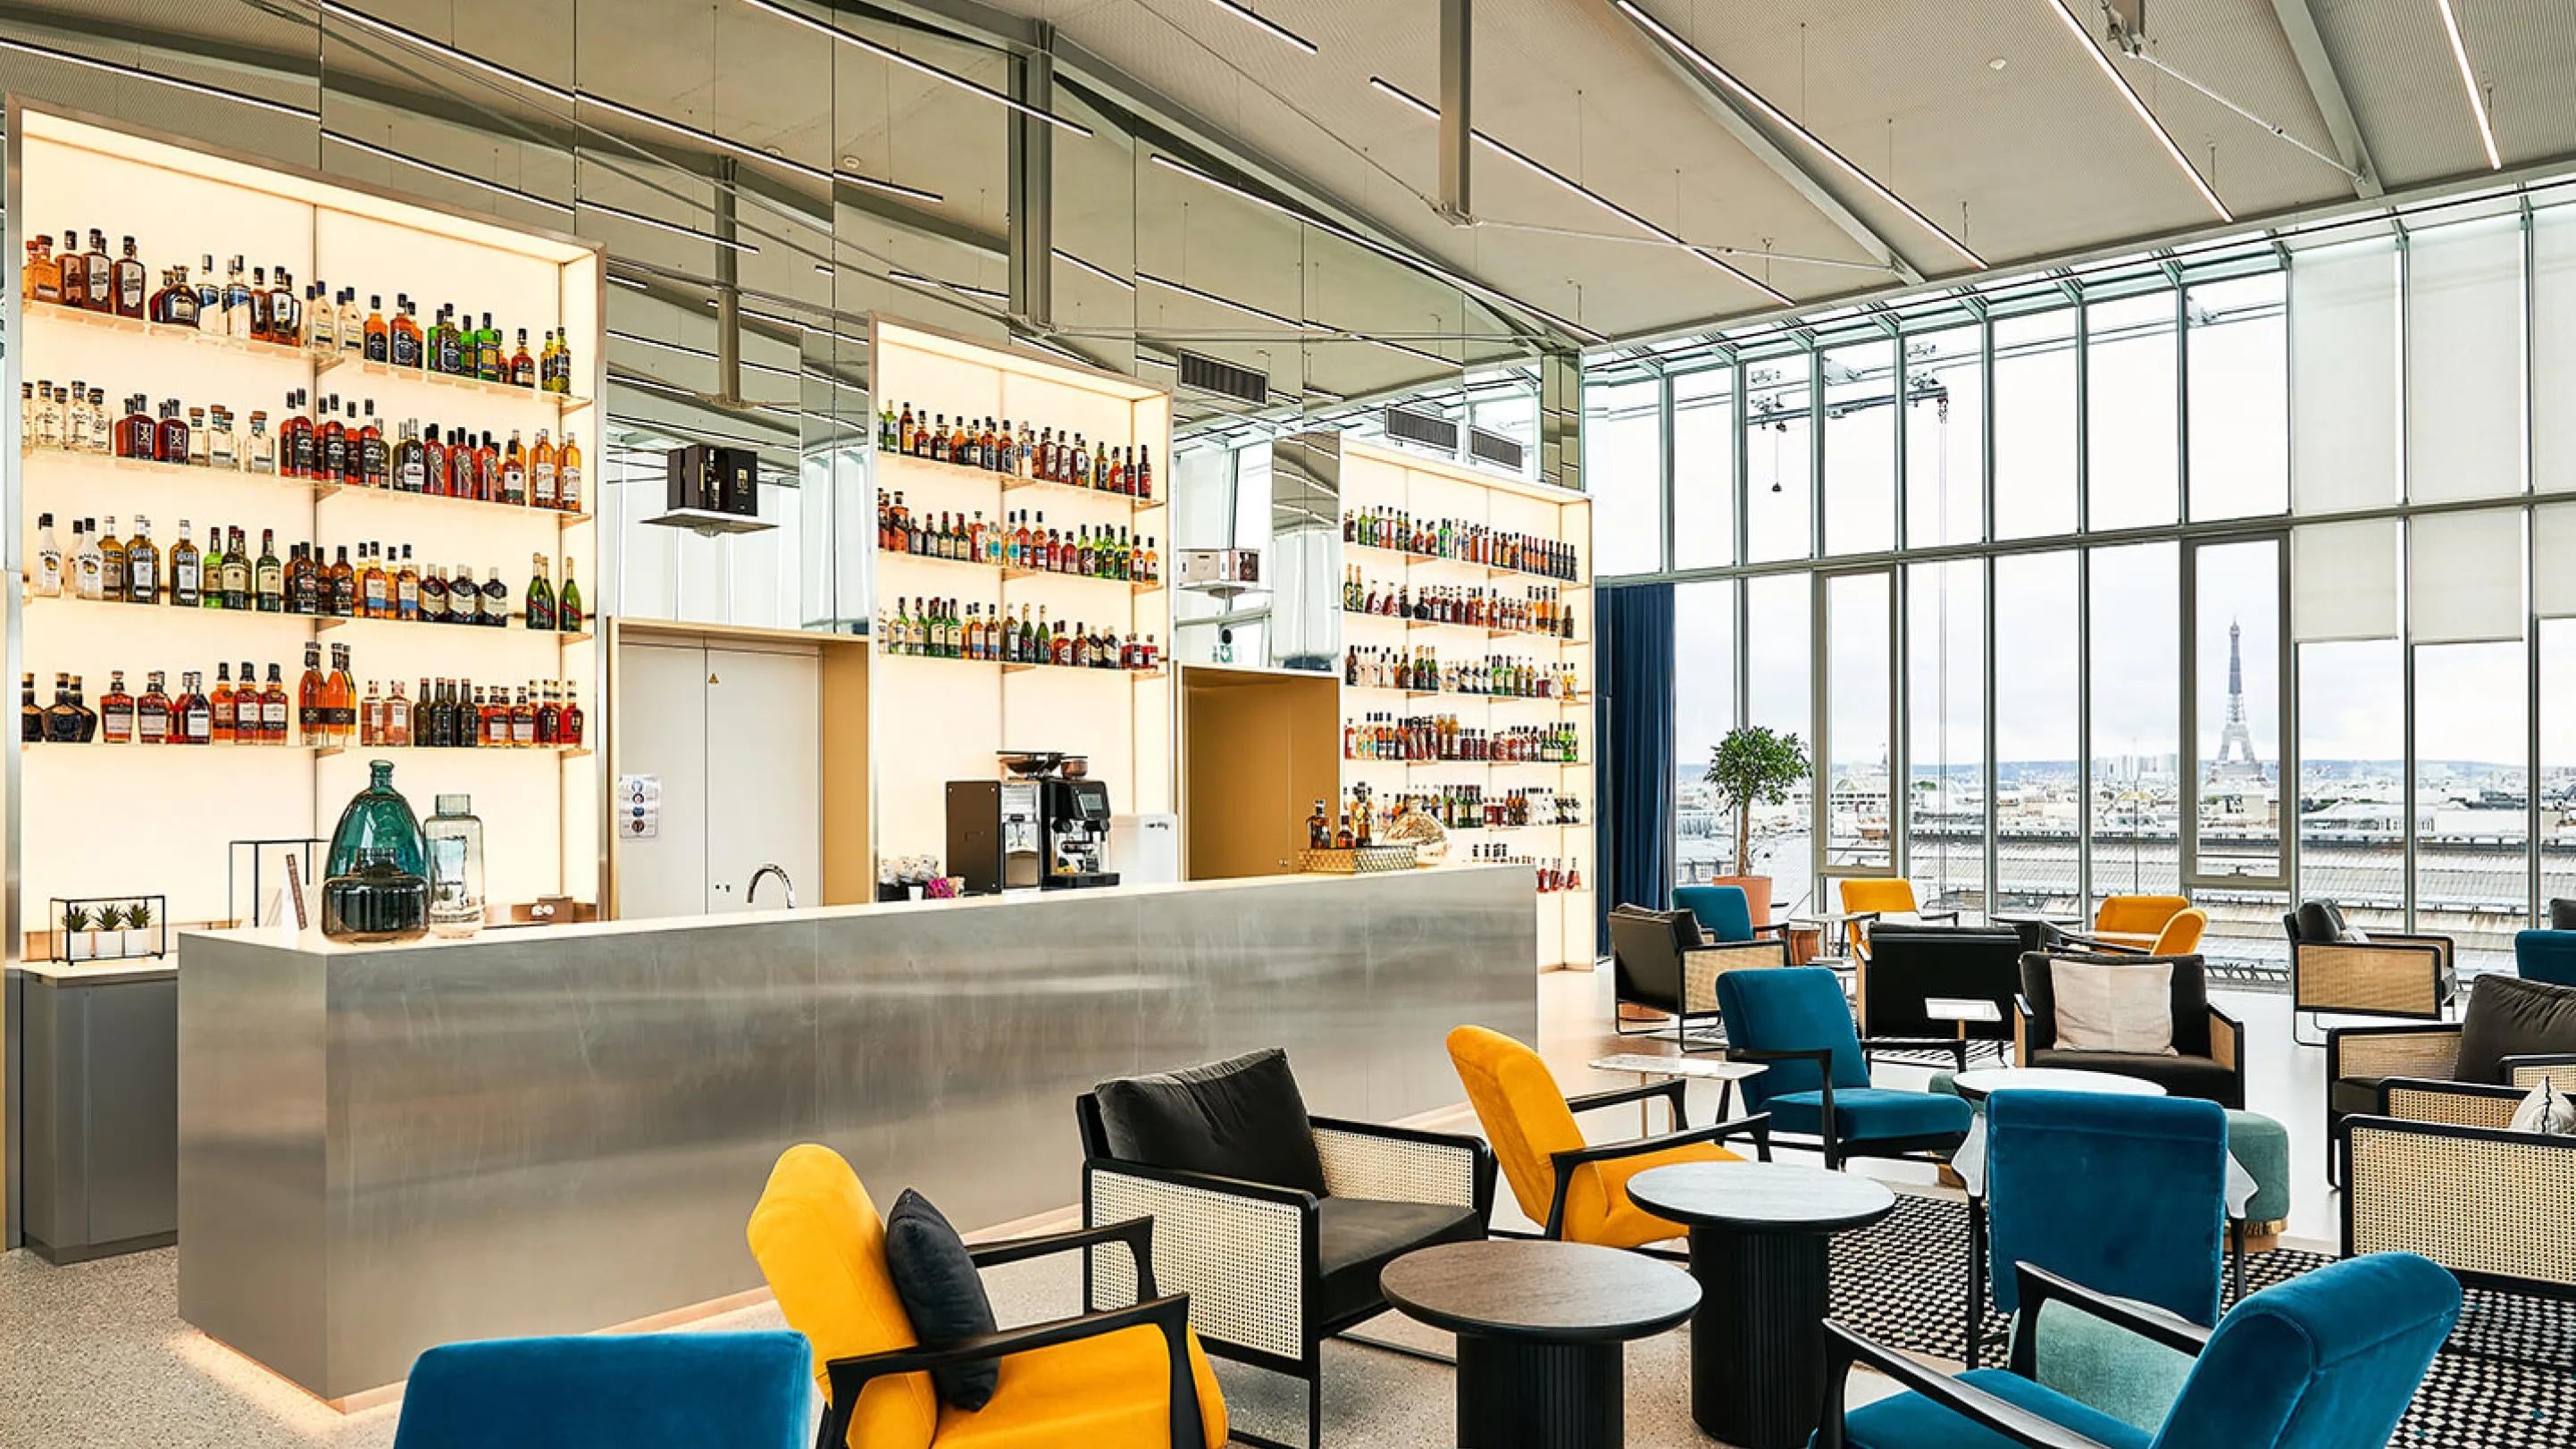 Sky Bar at The Island, Pernod Ricard's headquarters in Paris, France.